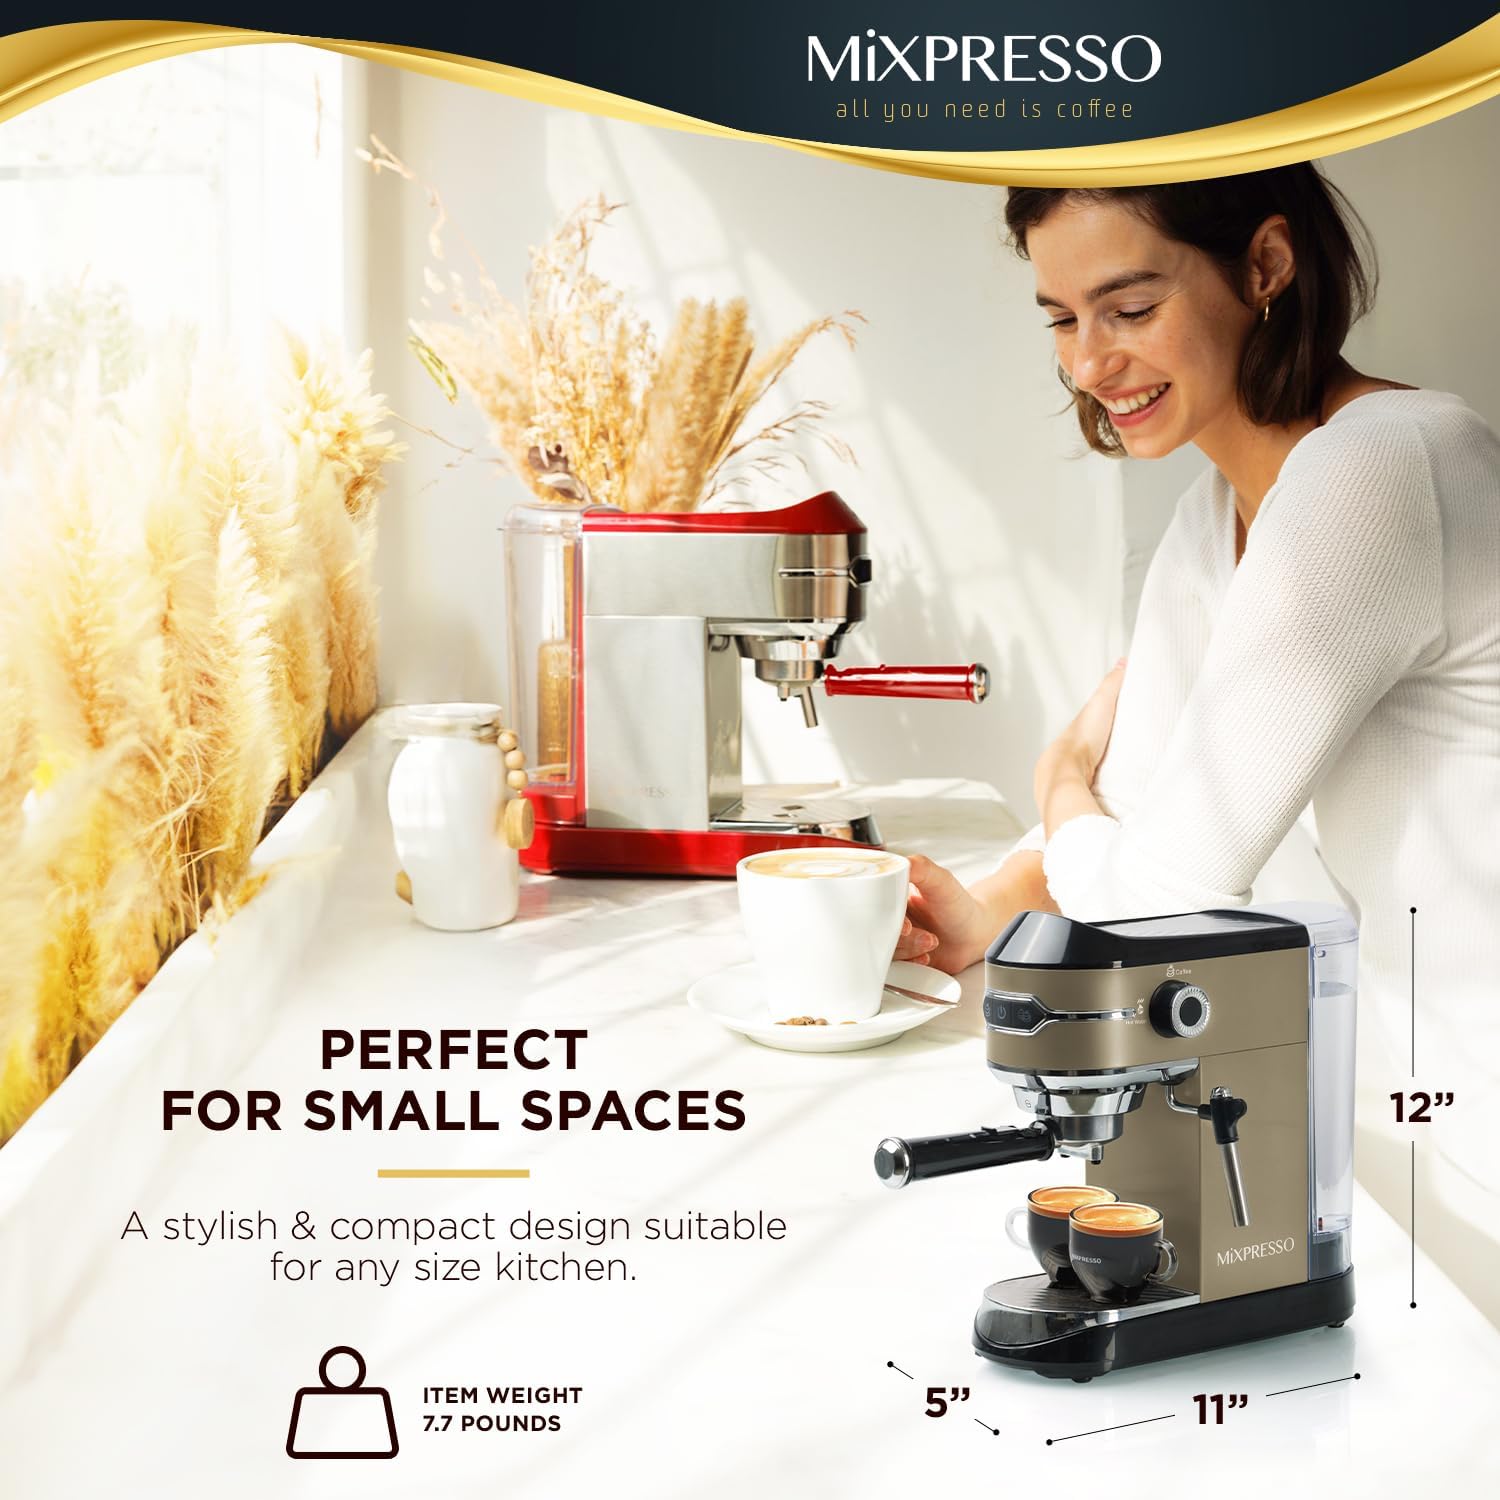 Mixpresso Professional Espresso Machine for Home 15 Bar with Milk Frother Steam Wand, Espresso Maker with Double-Cup Splitter 1450w Fast Heating, Cappuccino and Latte machine 37Oz Water Tank